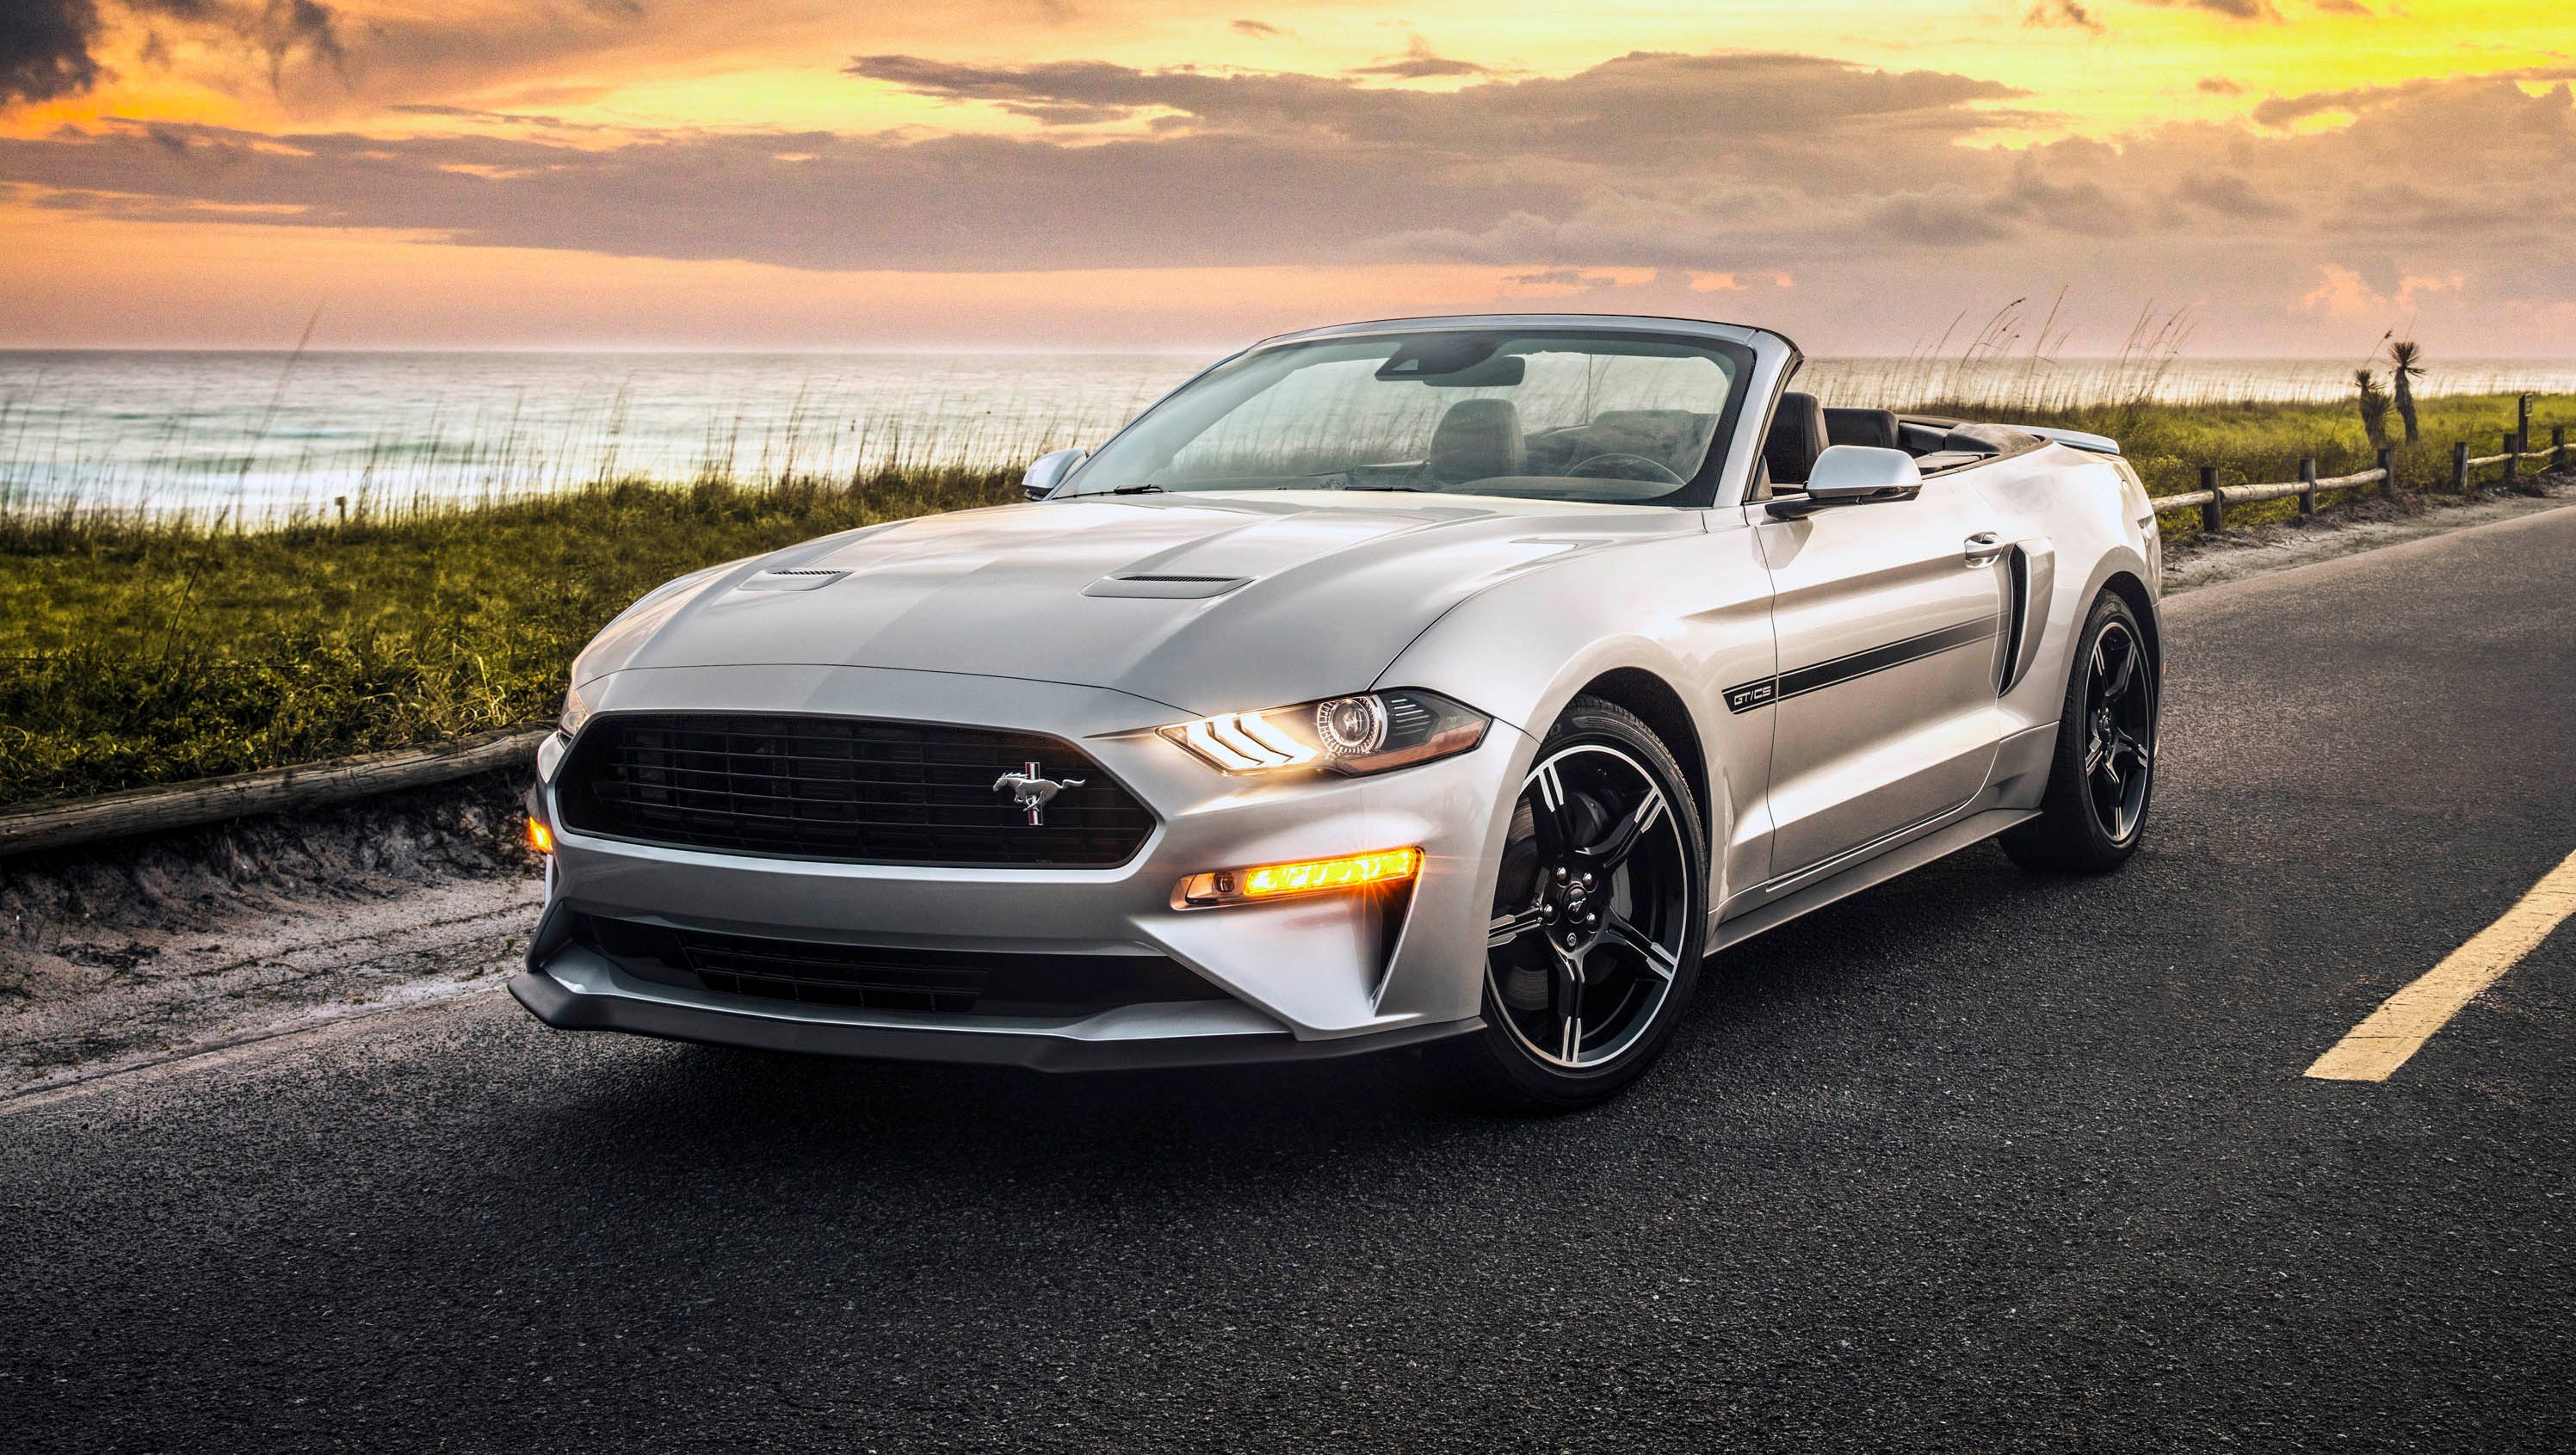 2019 Ford Mustang GT California Special adds muscle to lineup